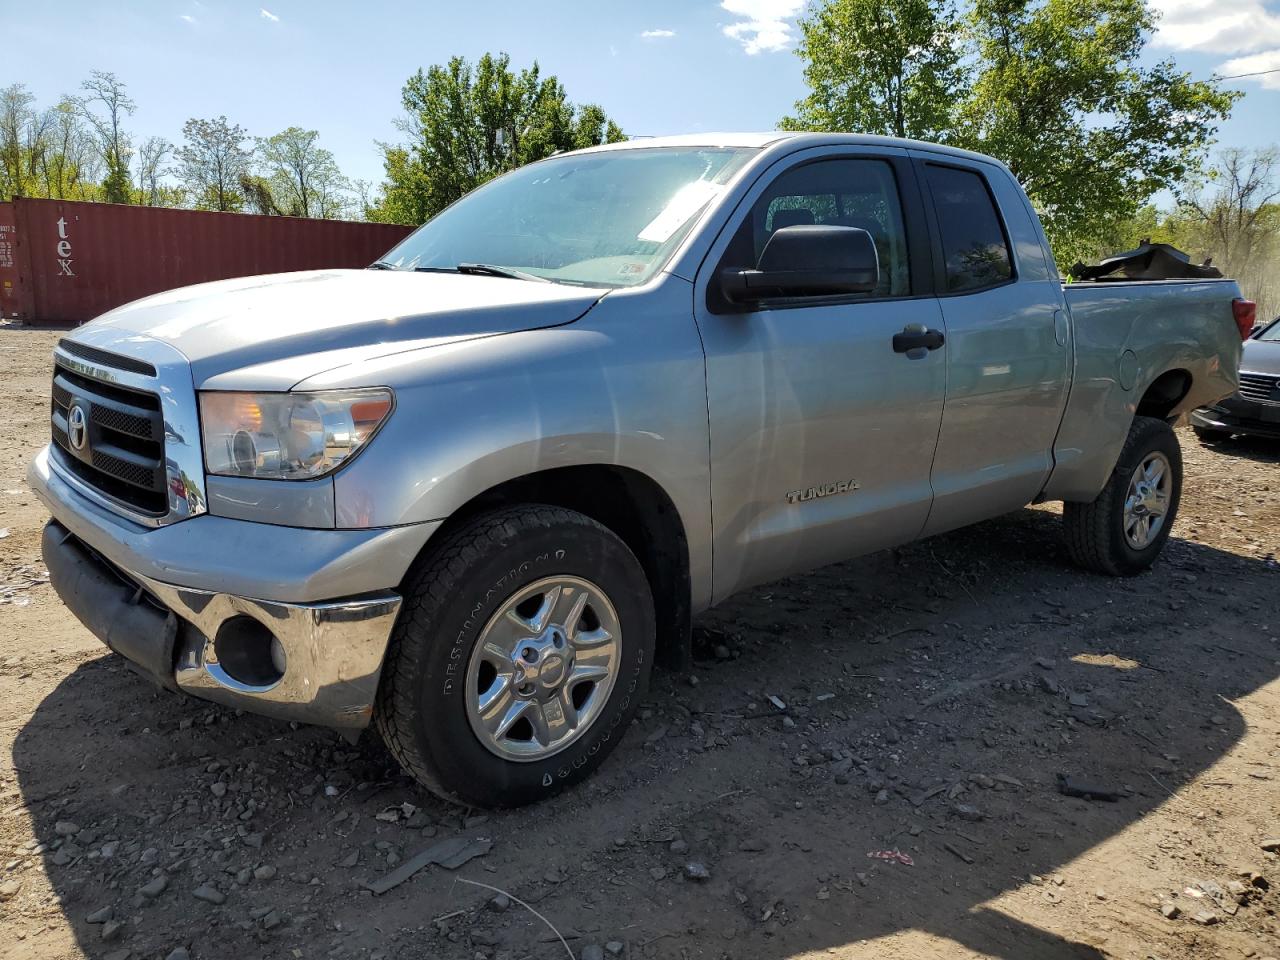 vin: 5TFUM5F16BX025997 5TFUM5F16BX025997 2011 toyota tundra 4600 for Sale in 21225, Md - Baltimore East, Baltimore, Maryland, USA